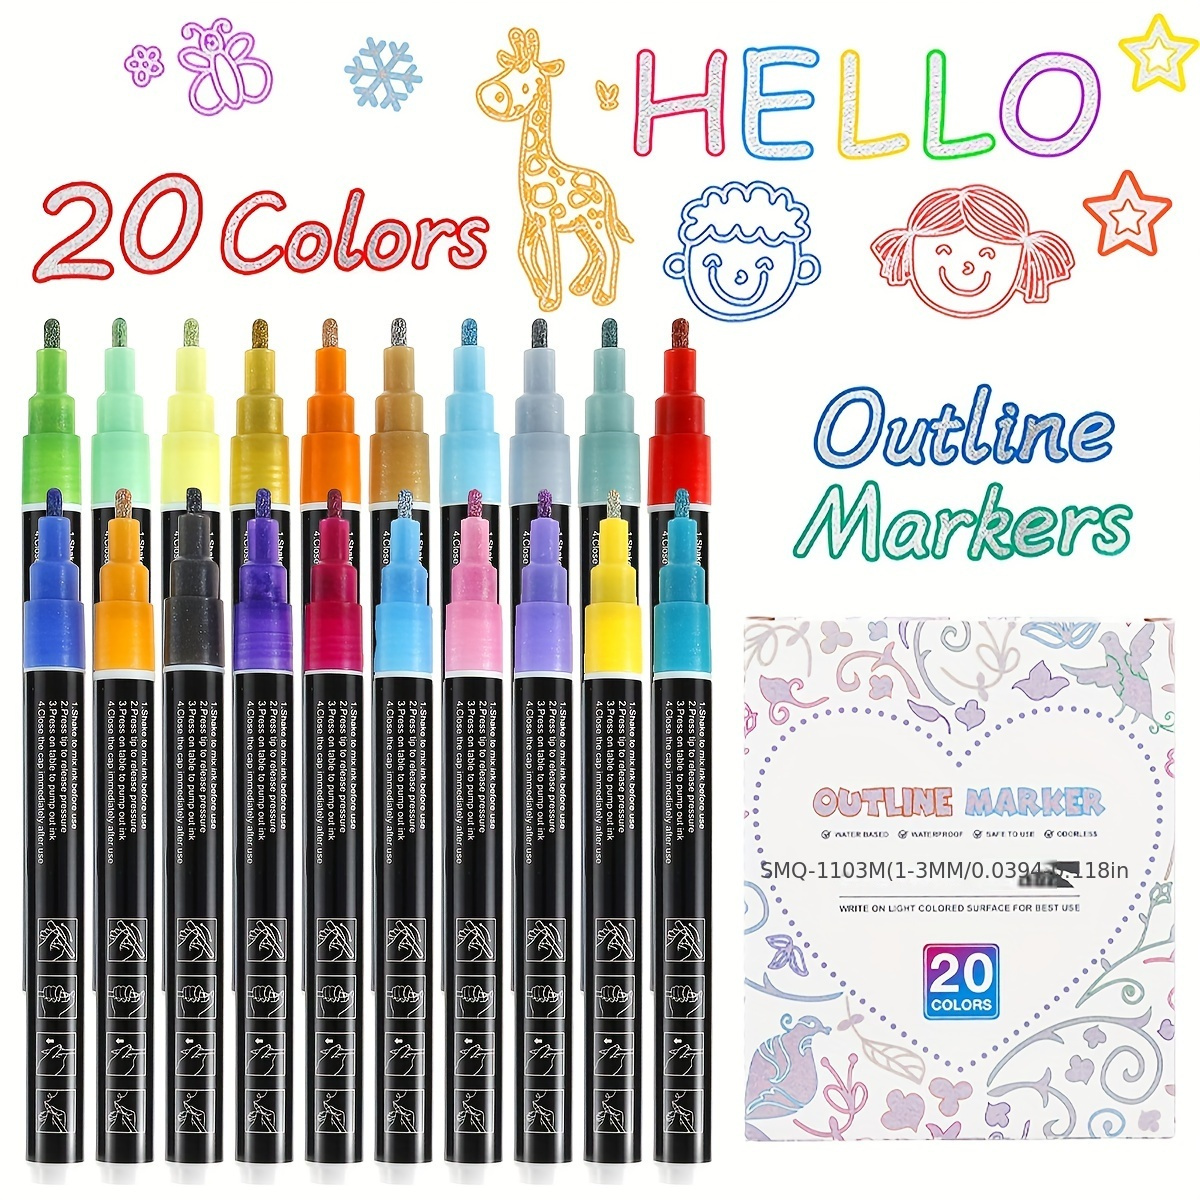 Dot Markers - Set of 20